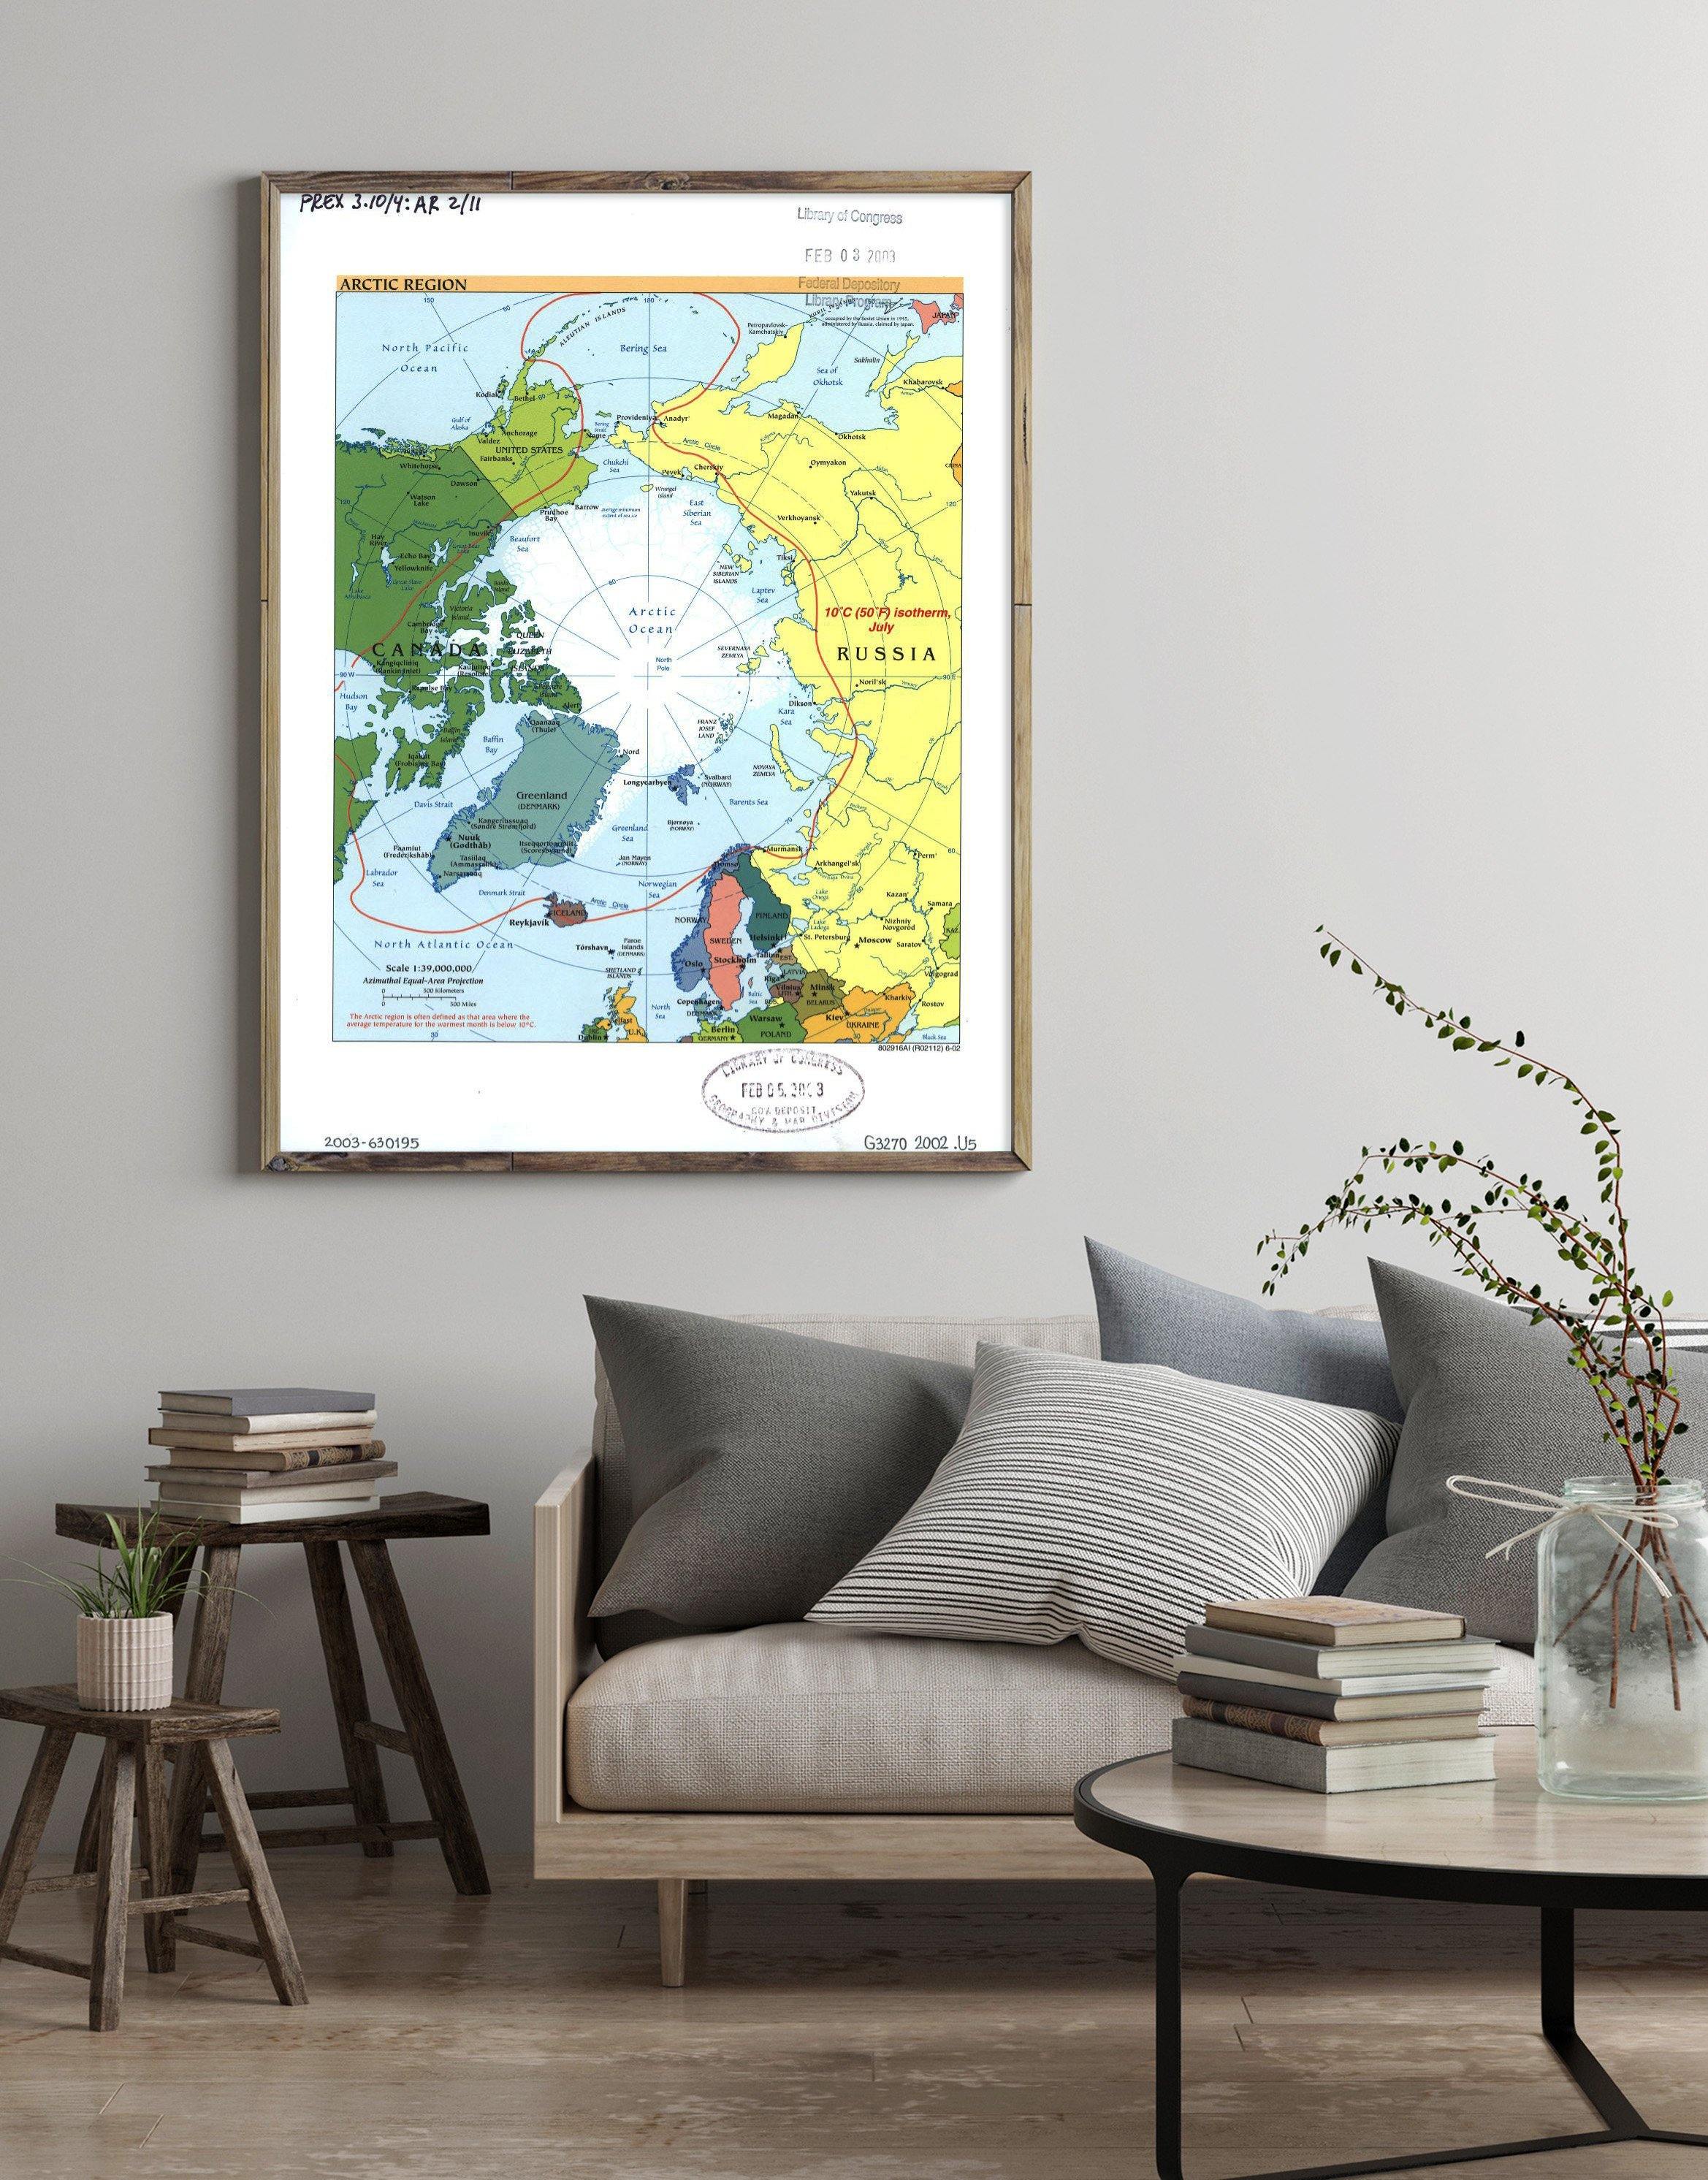 2002 Map| Arctic region| Arctic Regions Map Size: 18 inches x 24 inche - New York Map Company